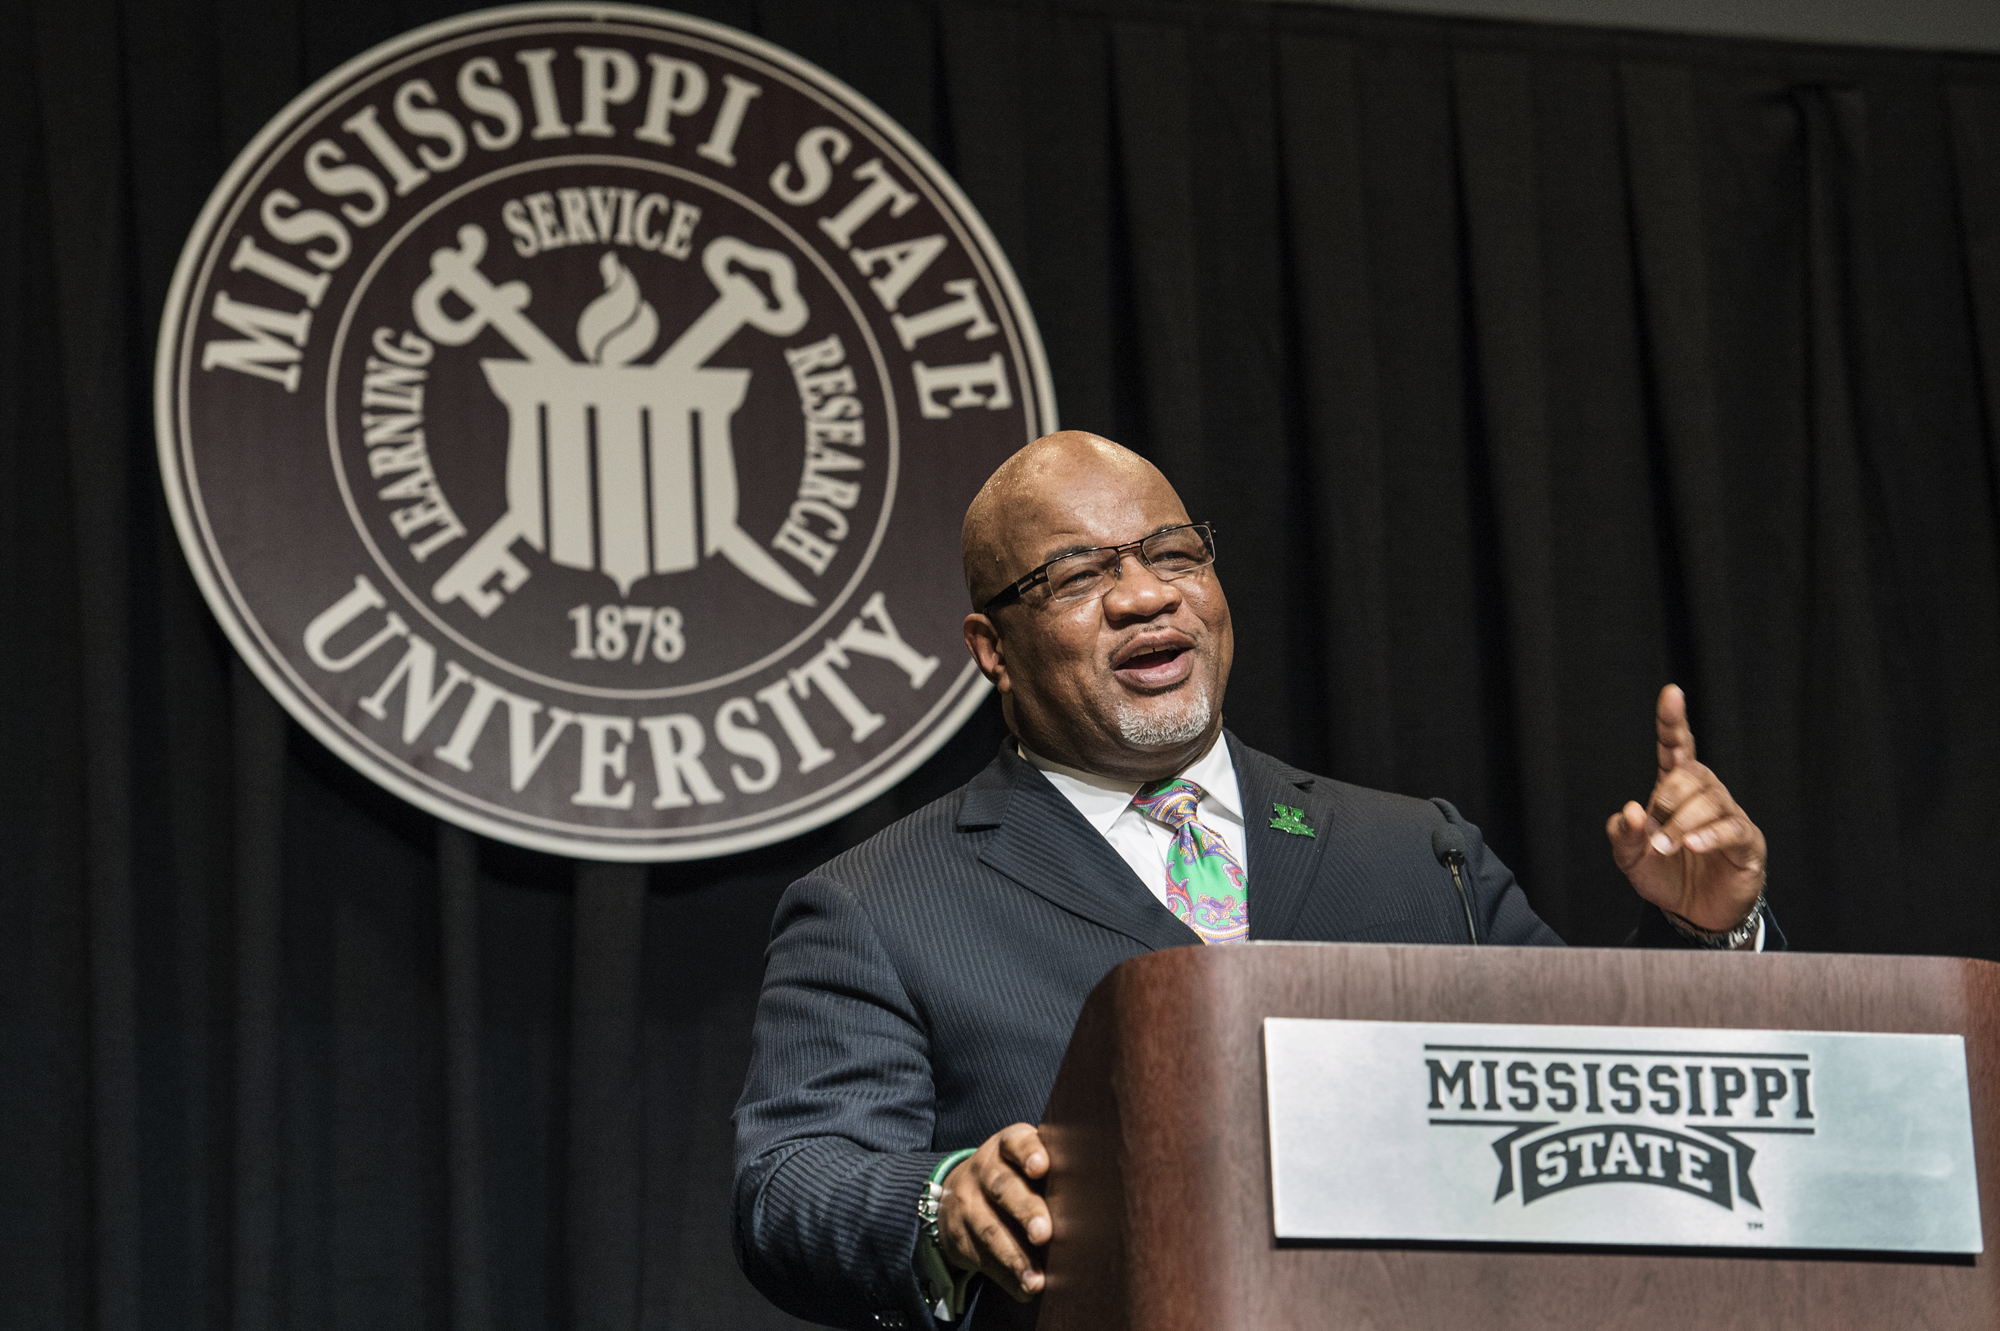 Mississippi Valley State University President William B. Bynum Jr. is keynote speaker for Monday's Martin Luther King Jr. Day Unity Breakfast at MSU.